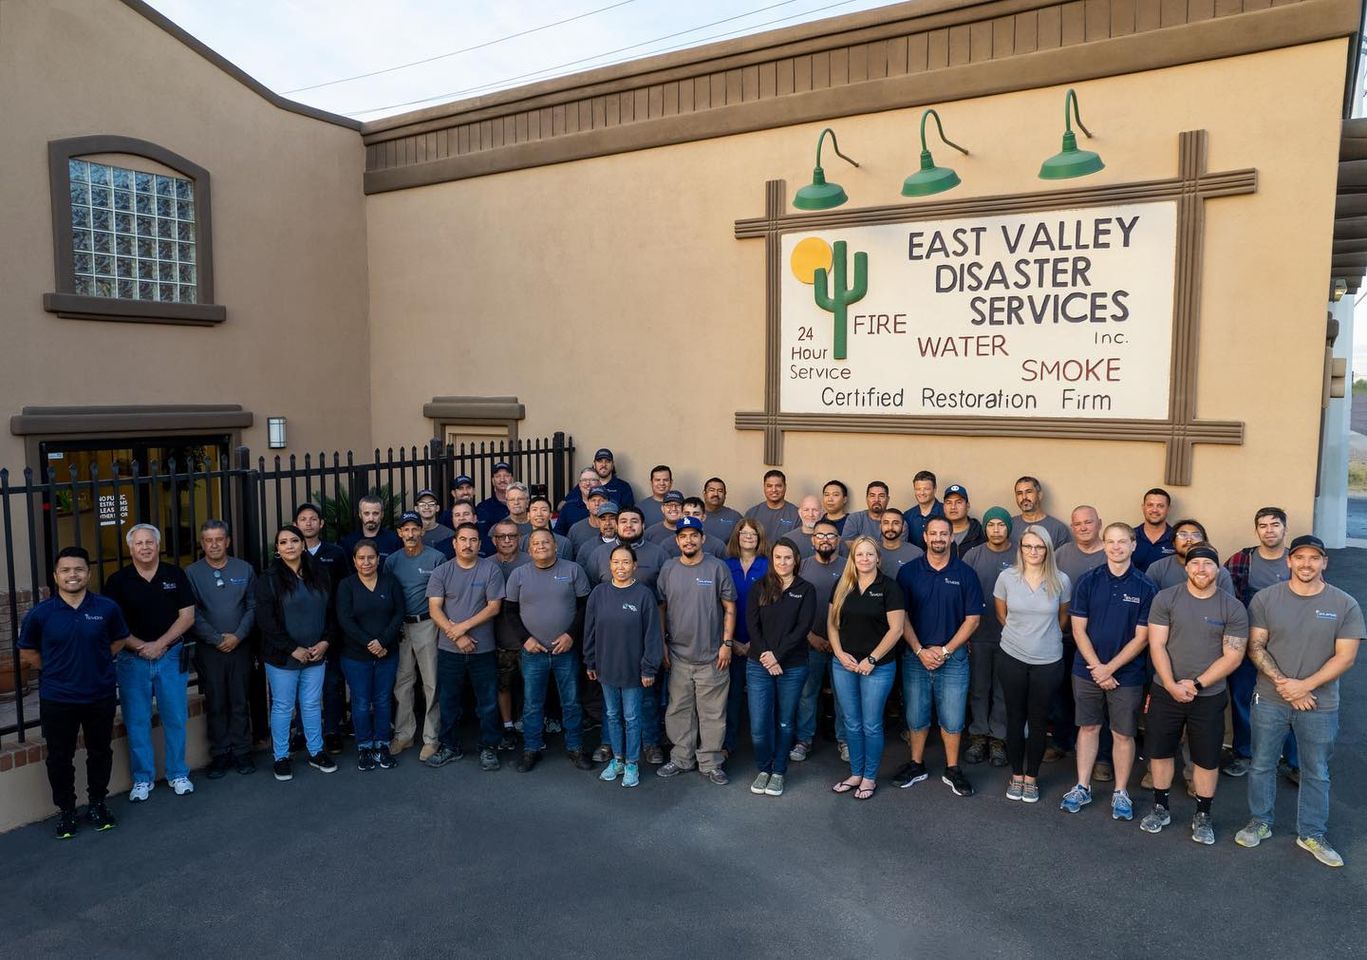 East Valley Disaster Services